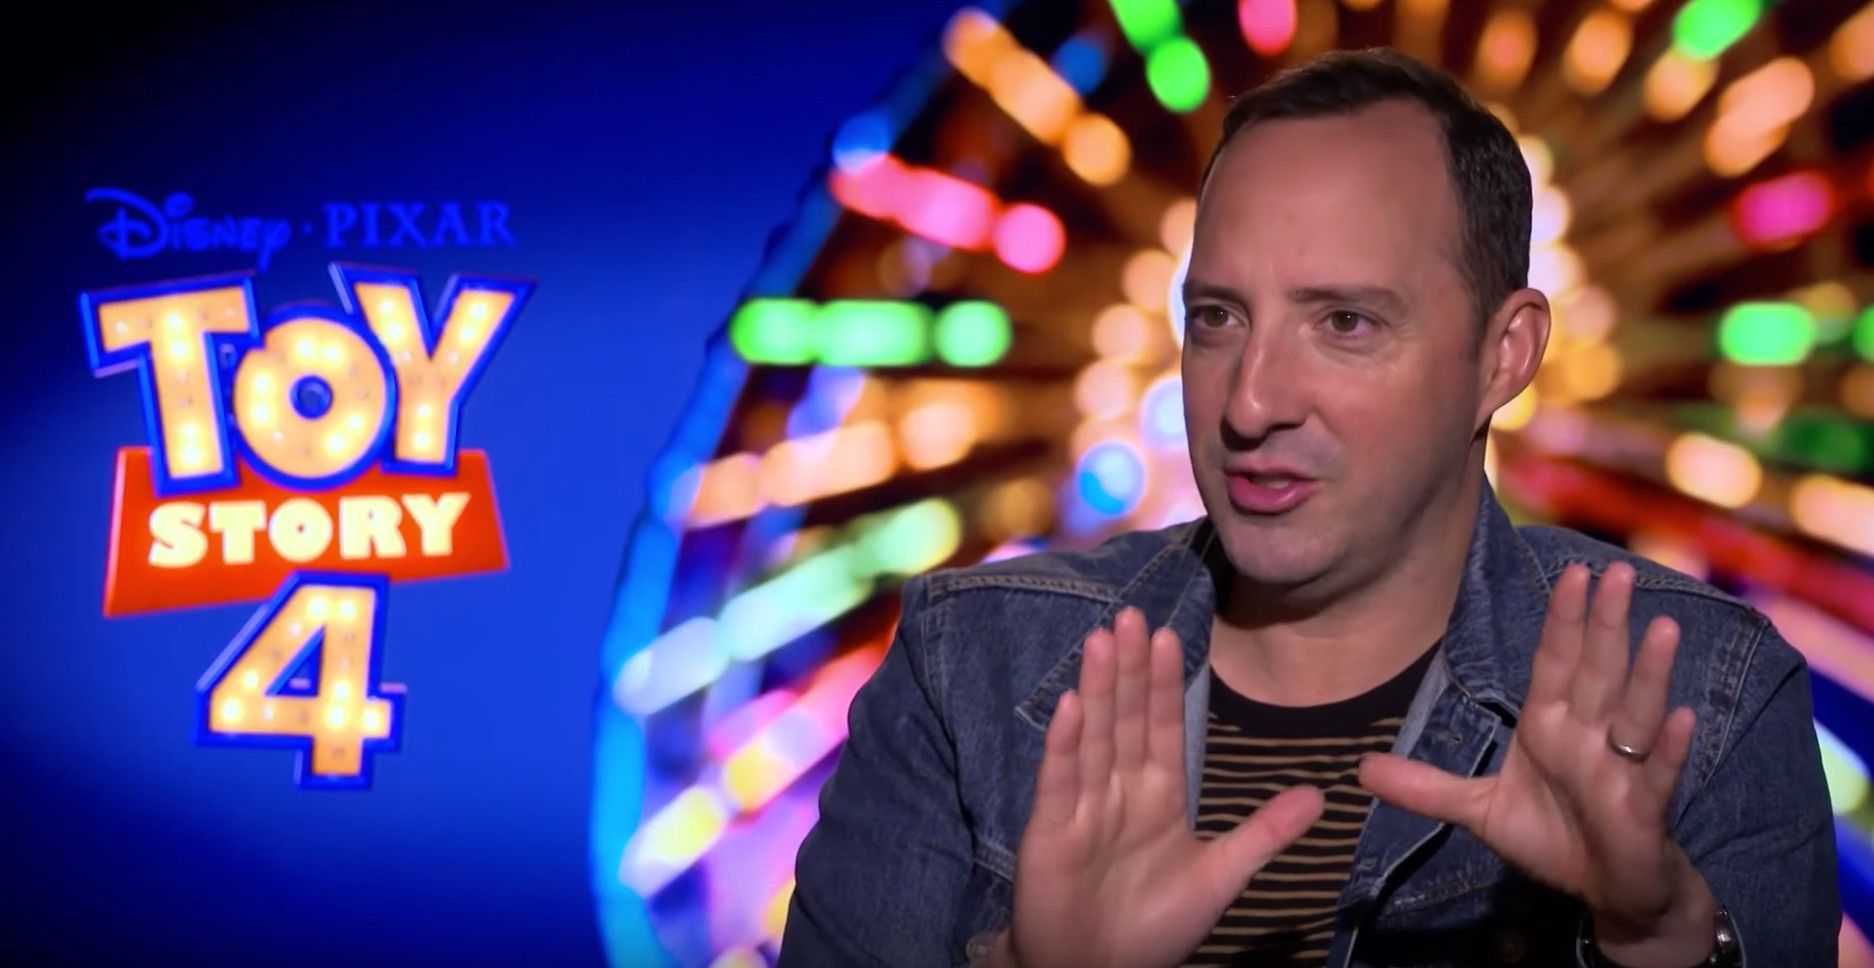 Tony Hale Toy Story 4 interview screenshot